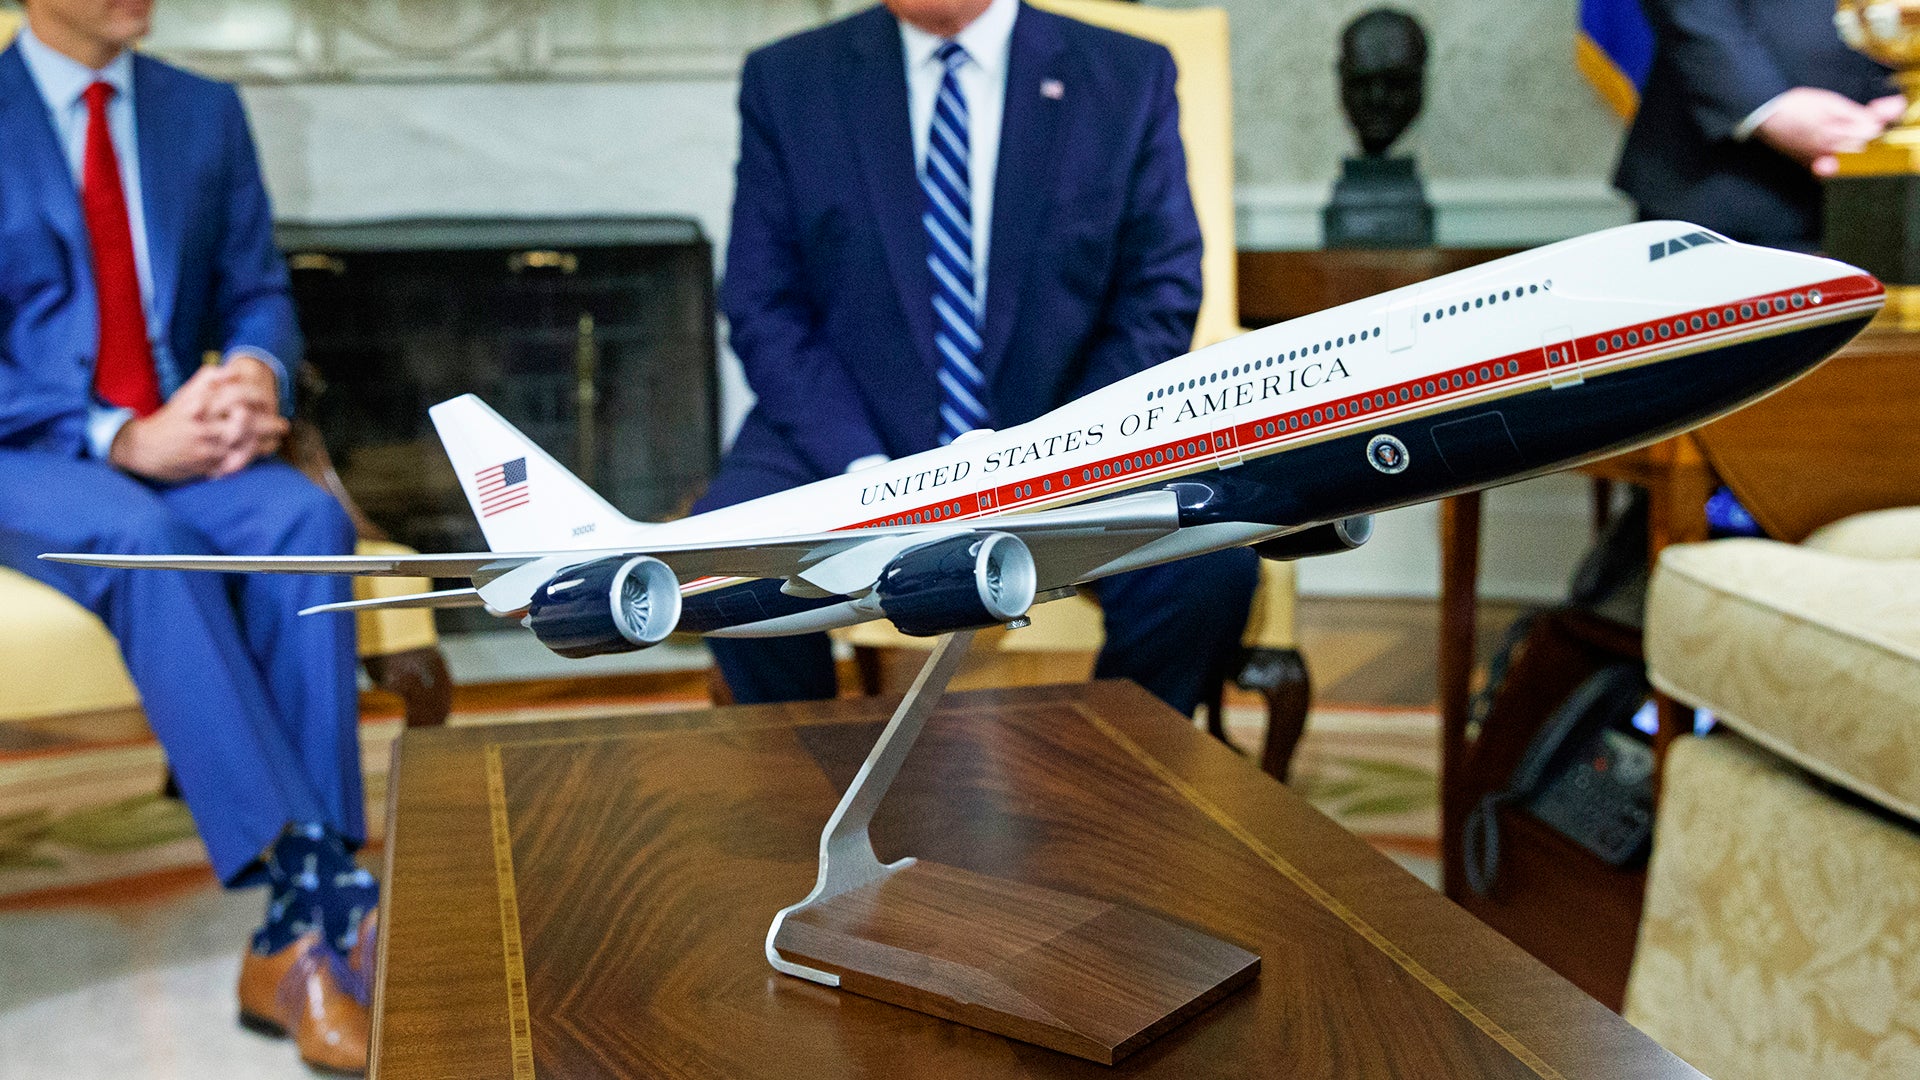 Boeing Is Being Paid $84 Million Just For Manuals For New Air Force One Jet